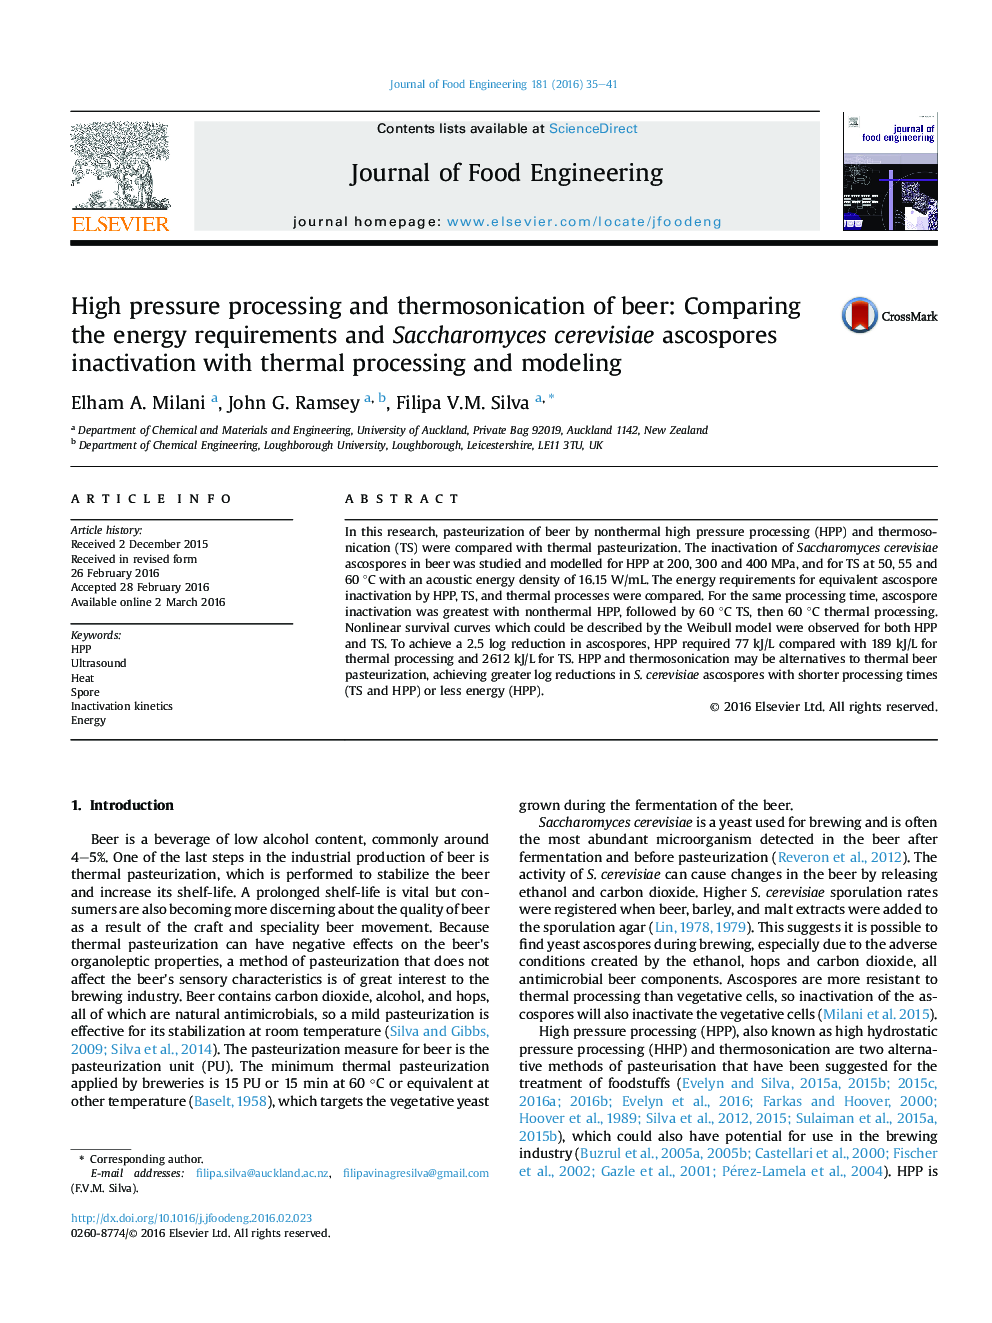 High pressure processing and thermosonication of beer: Comparing the energy requirements and Saccharomyces cerevisiae ascospores inactivation with thermal processing and modeling